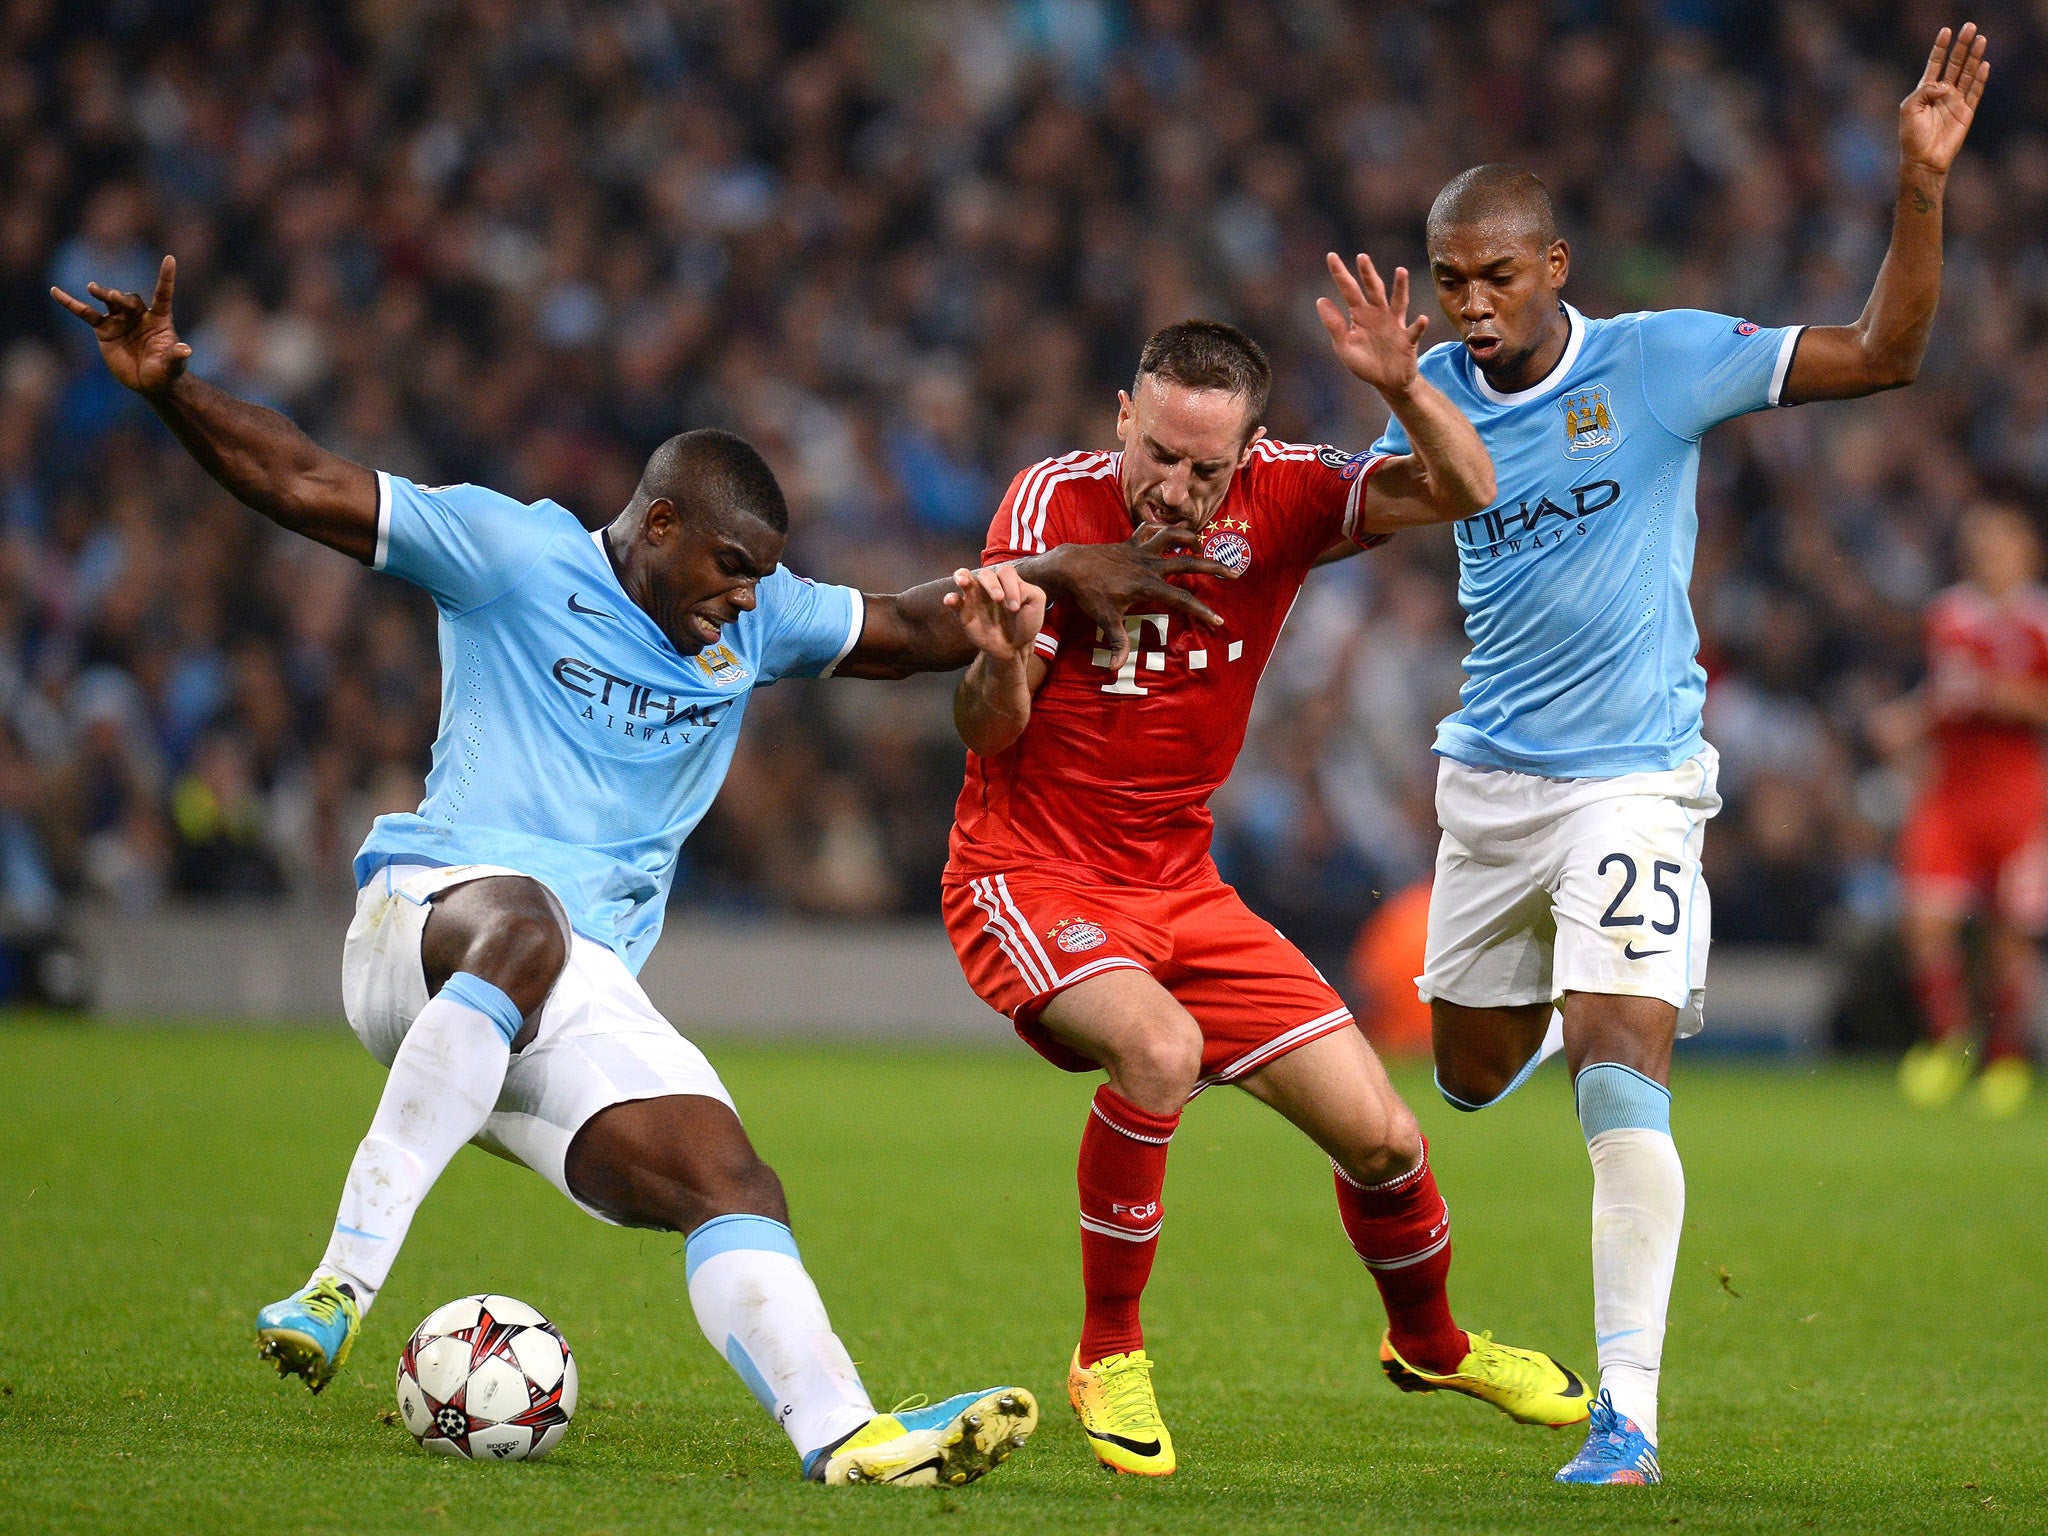 Micah Richards up against Franck Ribery in the Champions League